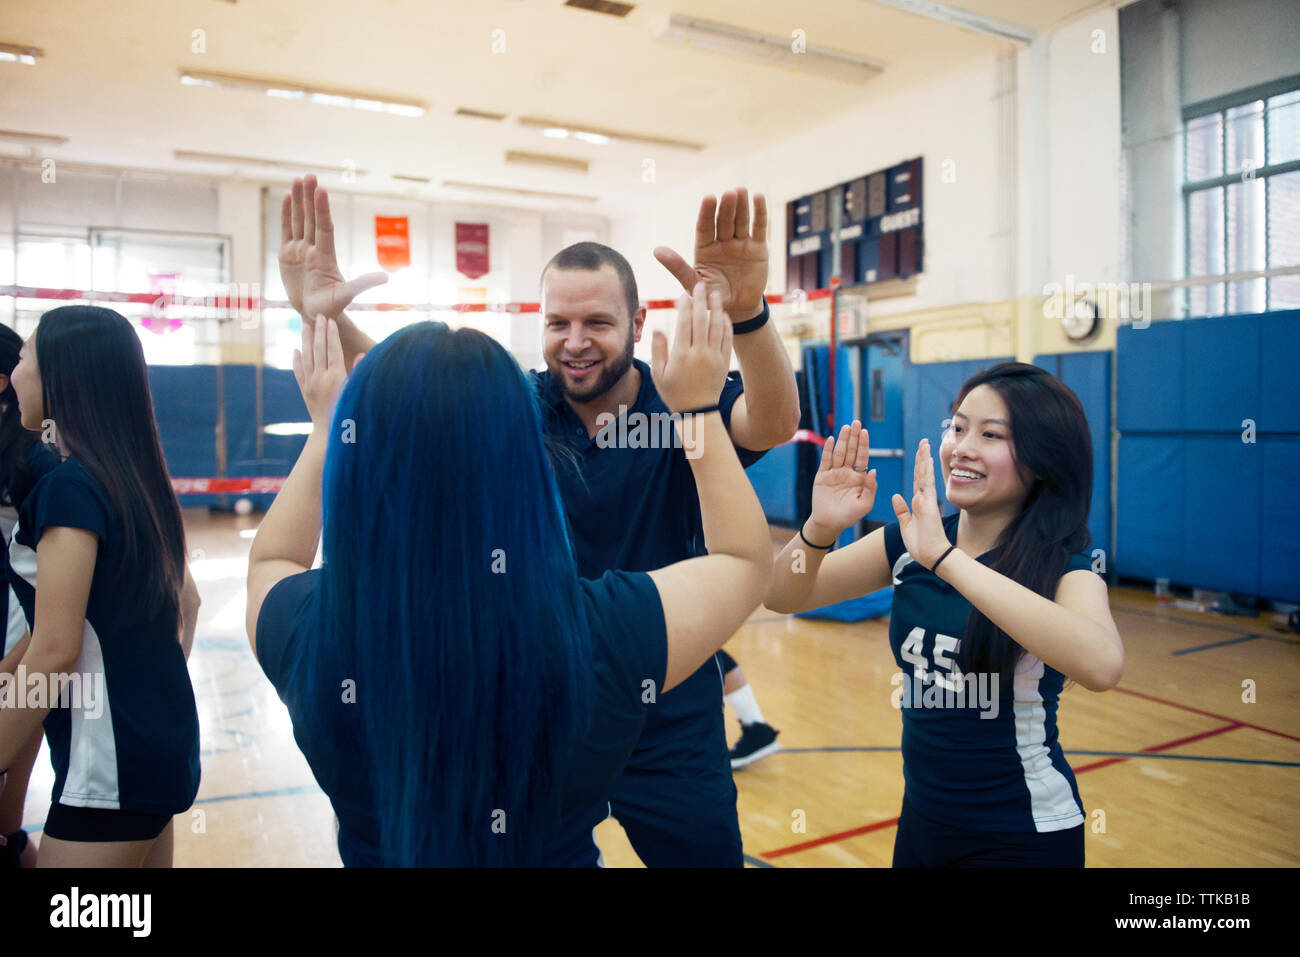 Teenage girls celebrating with male coach in court Stock Photo